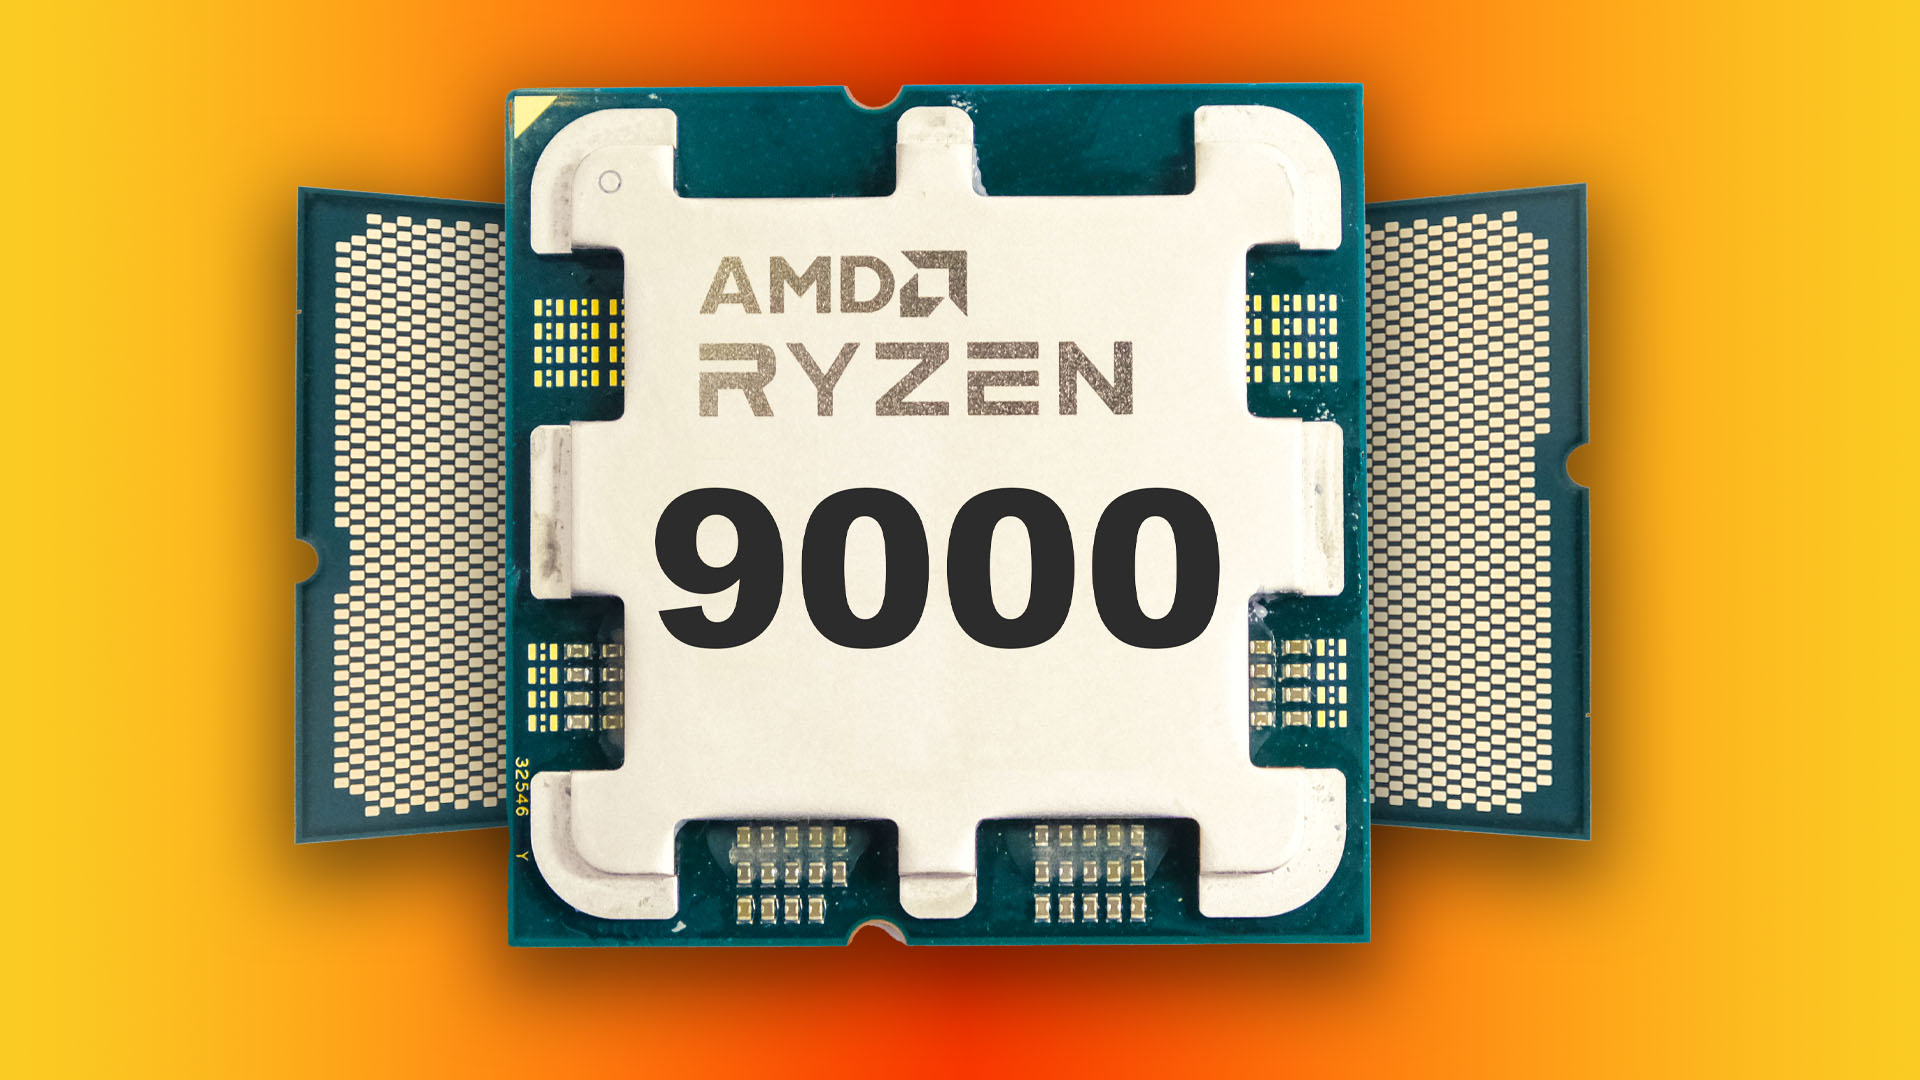 AMD Ryzen 9000 release date could be much sooner than expected